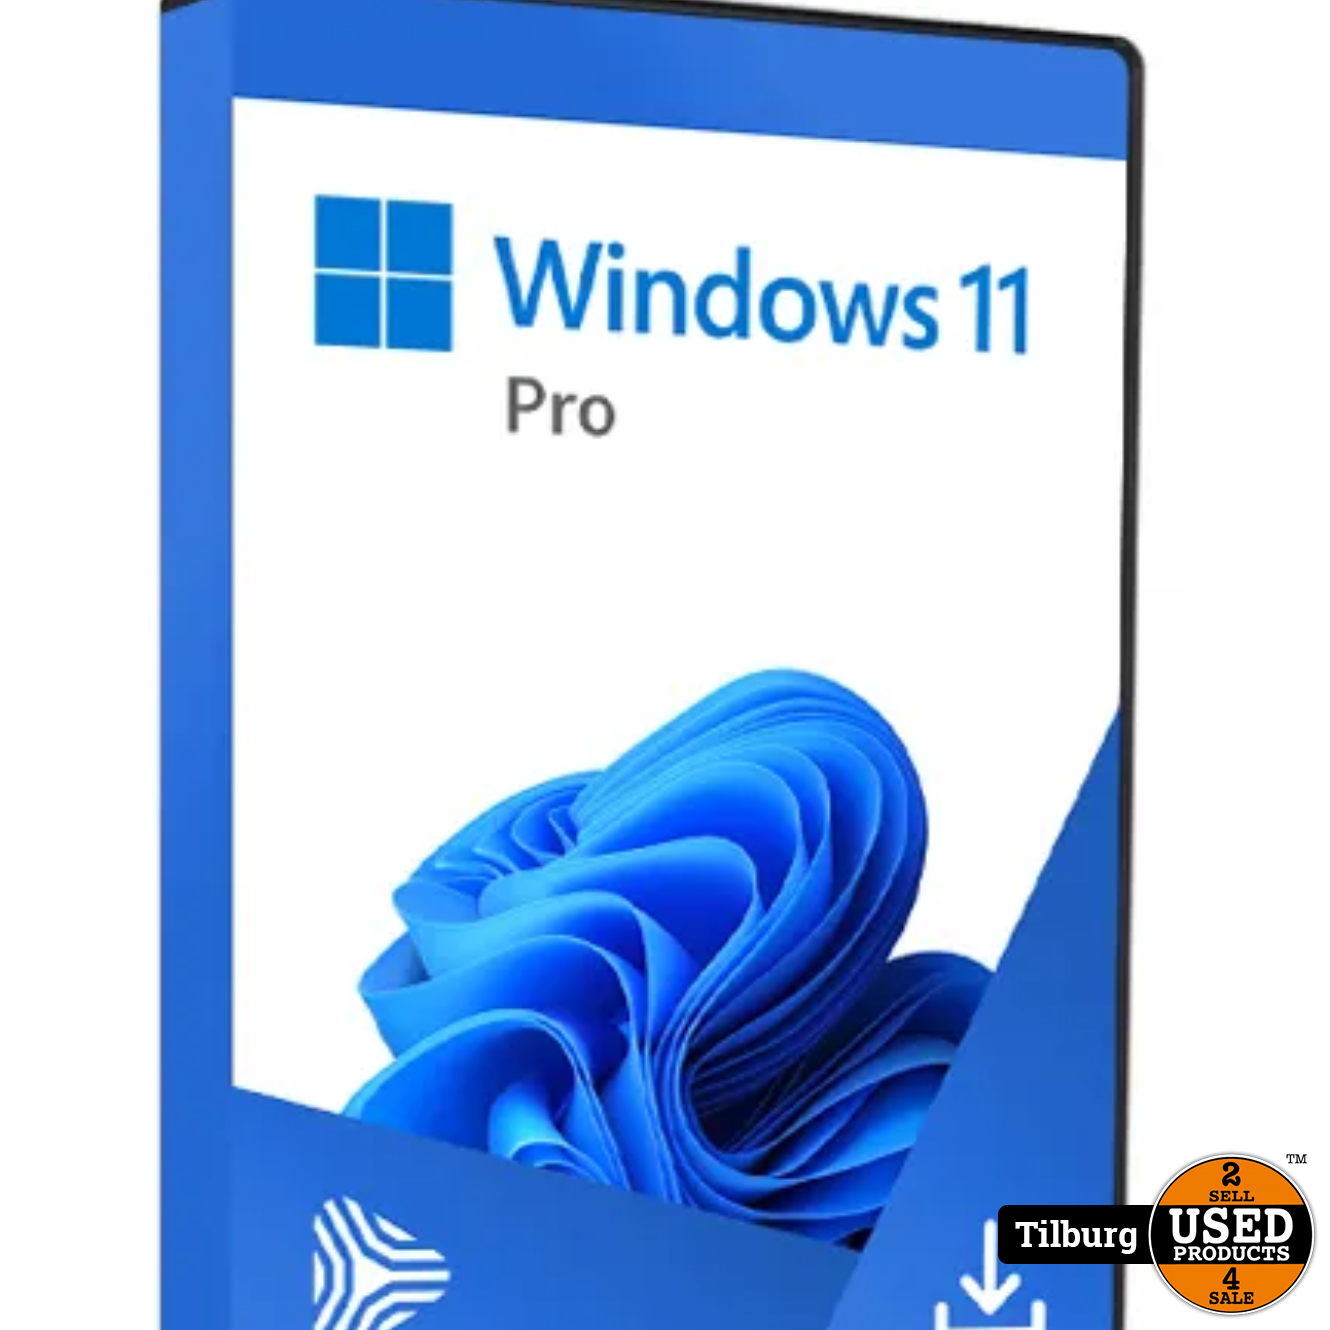 Windows 11 Licentie Digitale Code Used Products Tilburg 6074